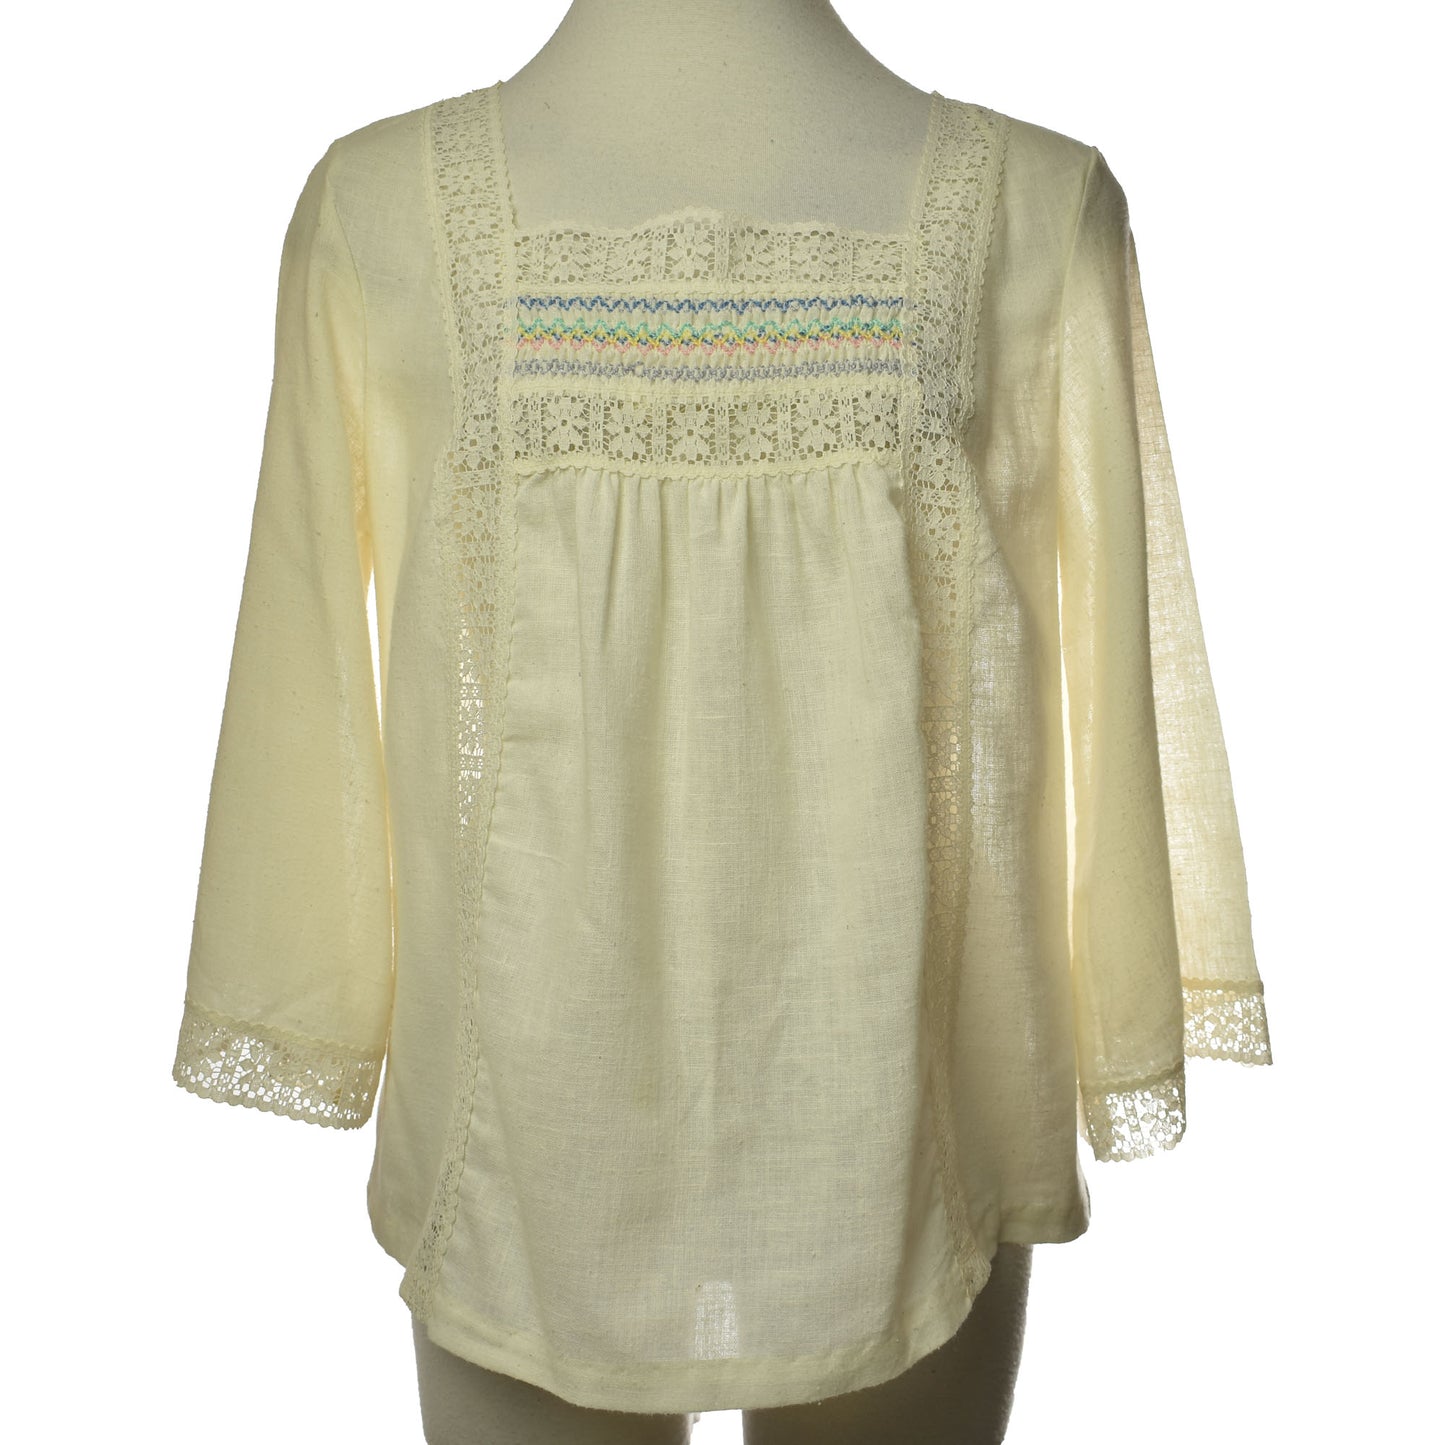 Vintage 70s Hippy Top Cotton Lace and Embroidered Blouse